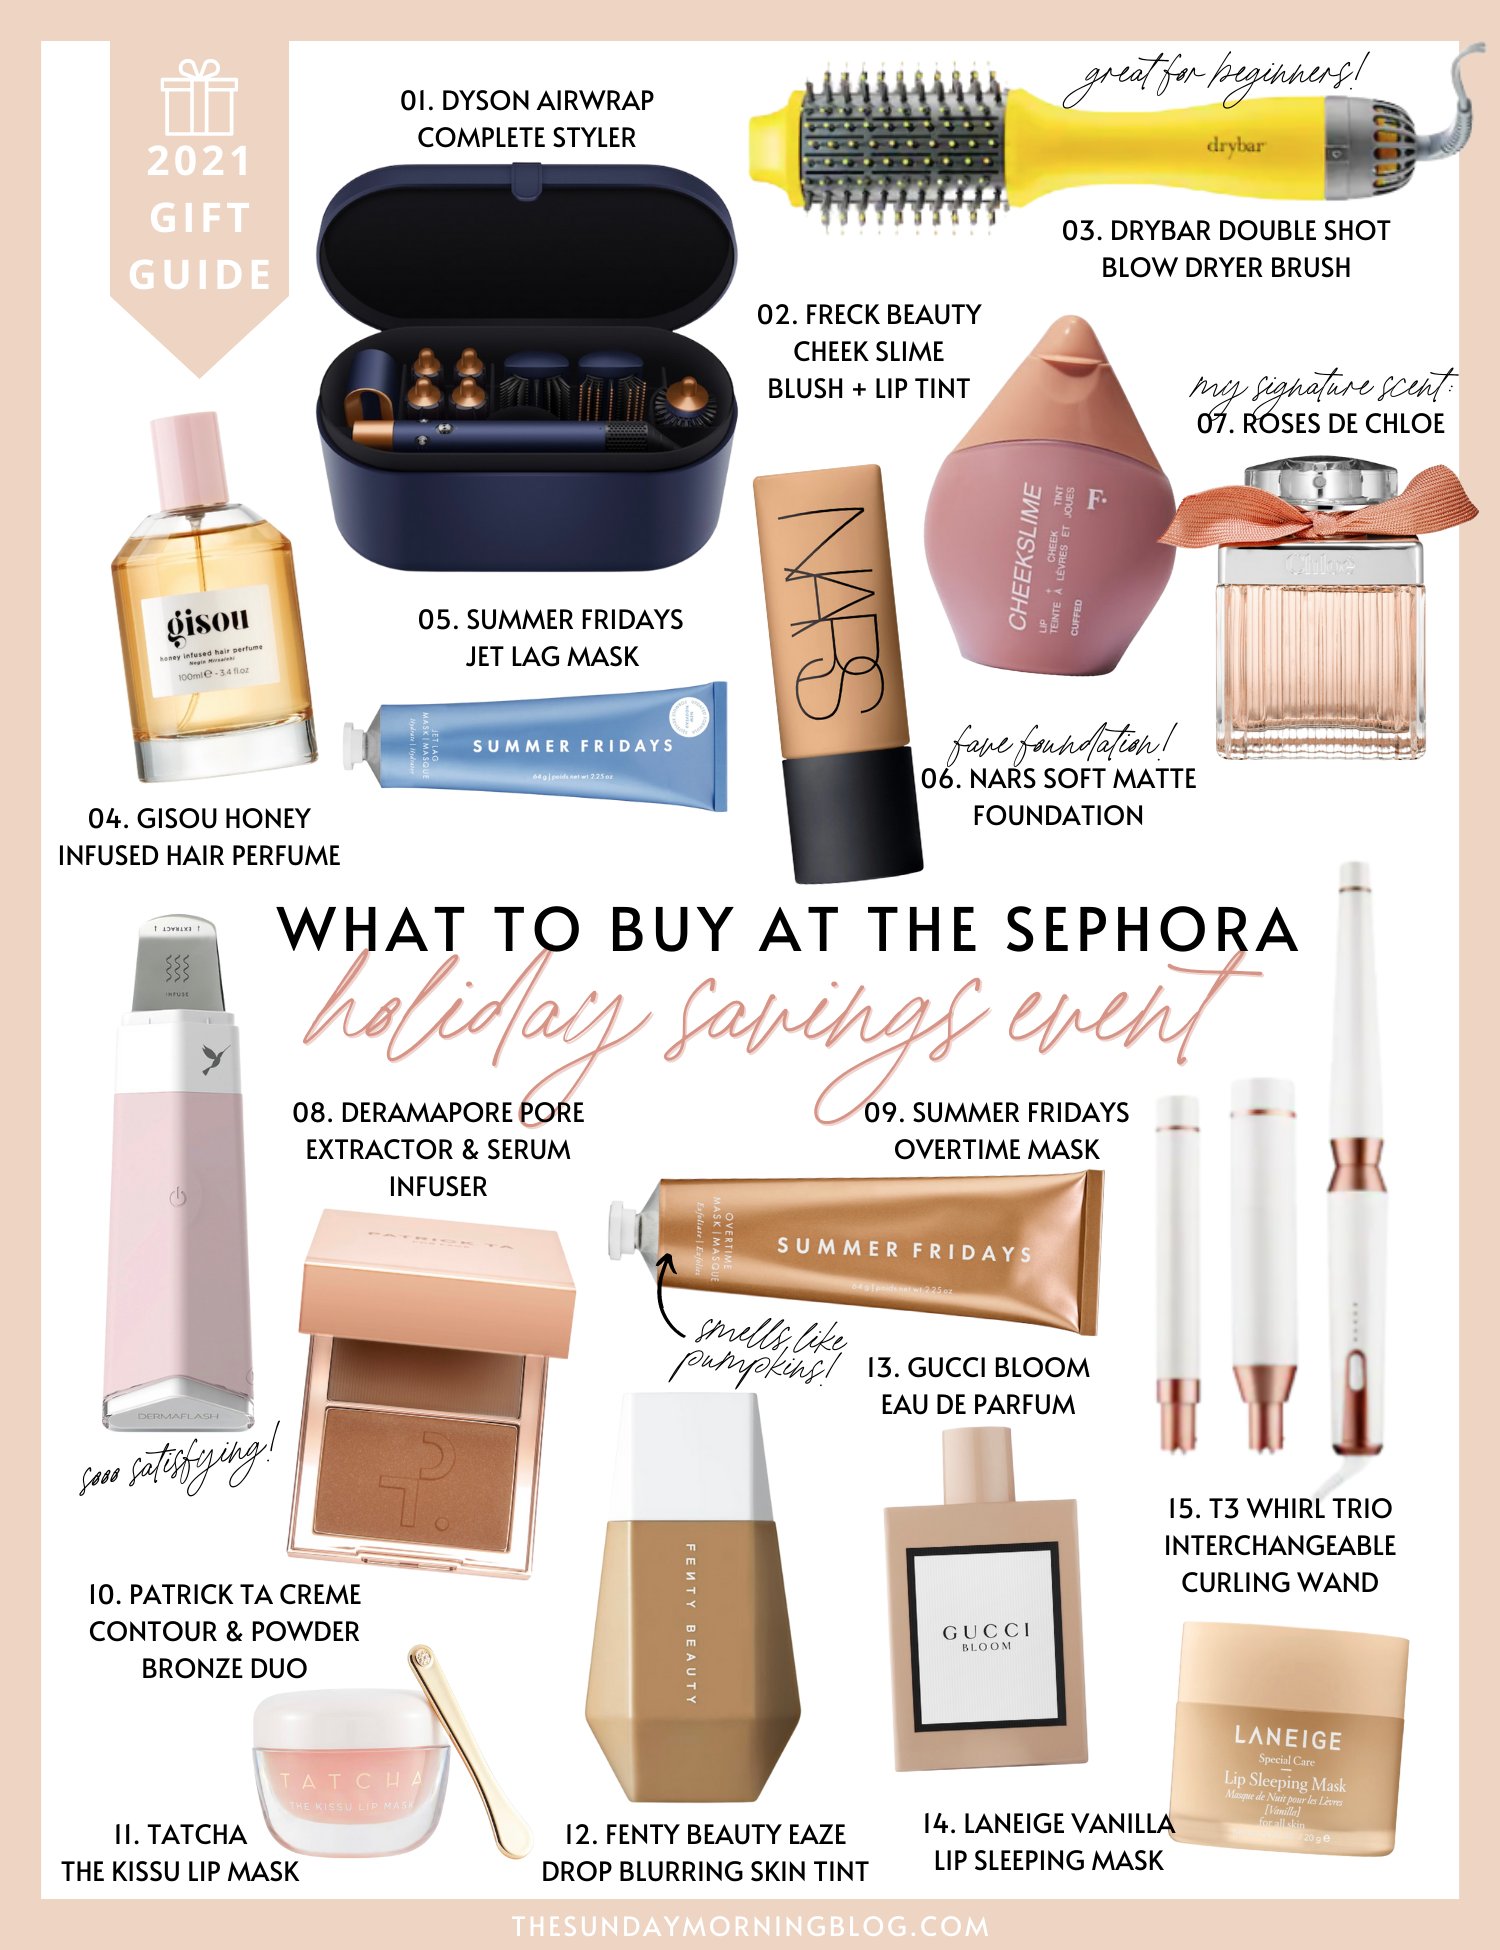 20 Top-Rated Sephora Products to Buy During the Spring Savings Event